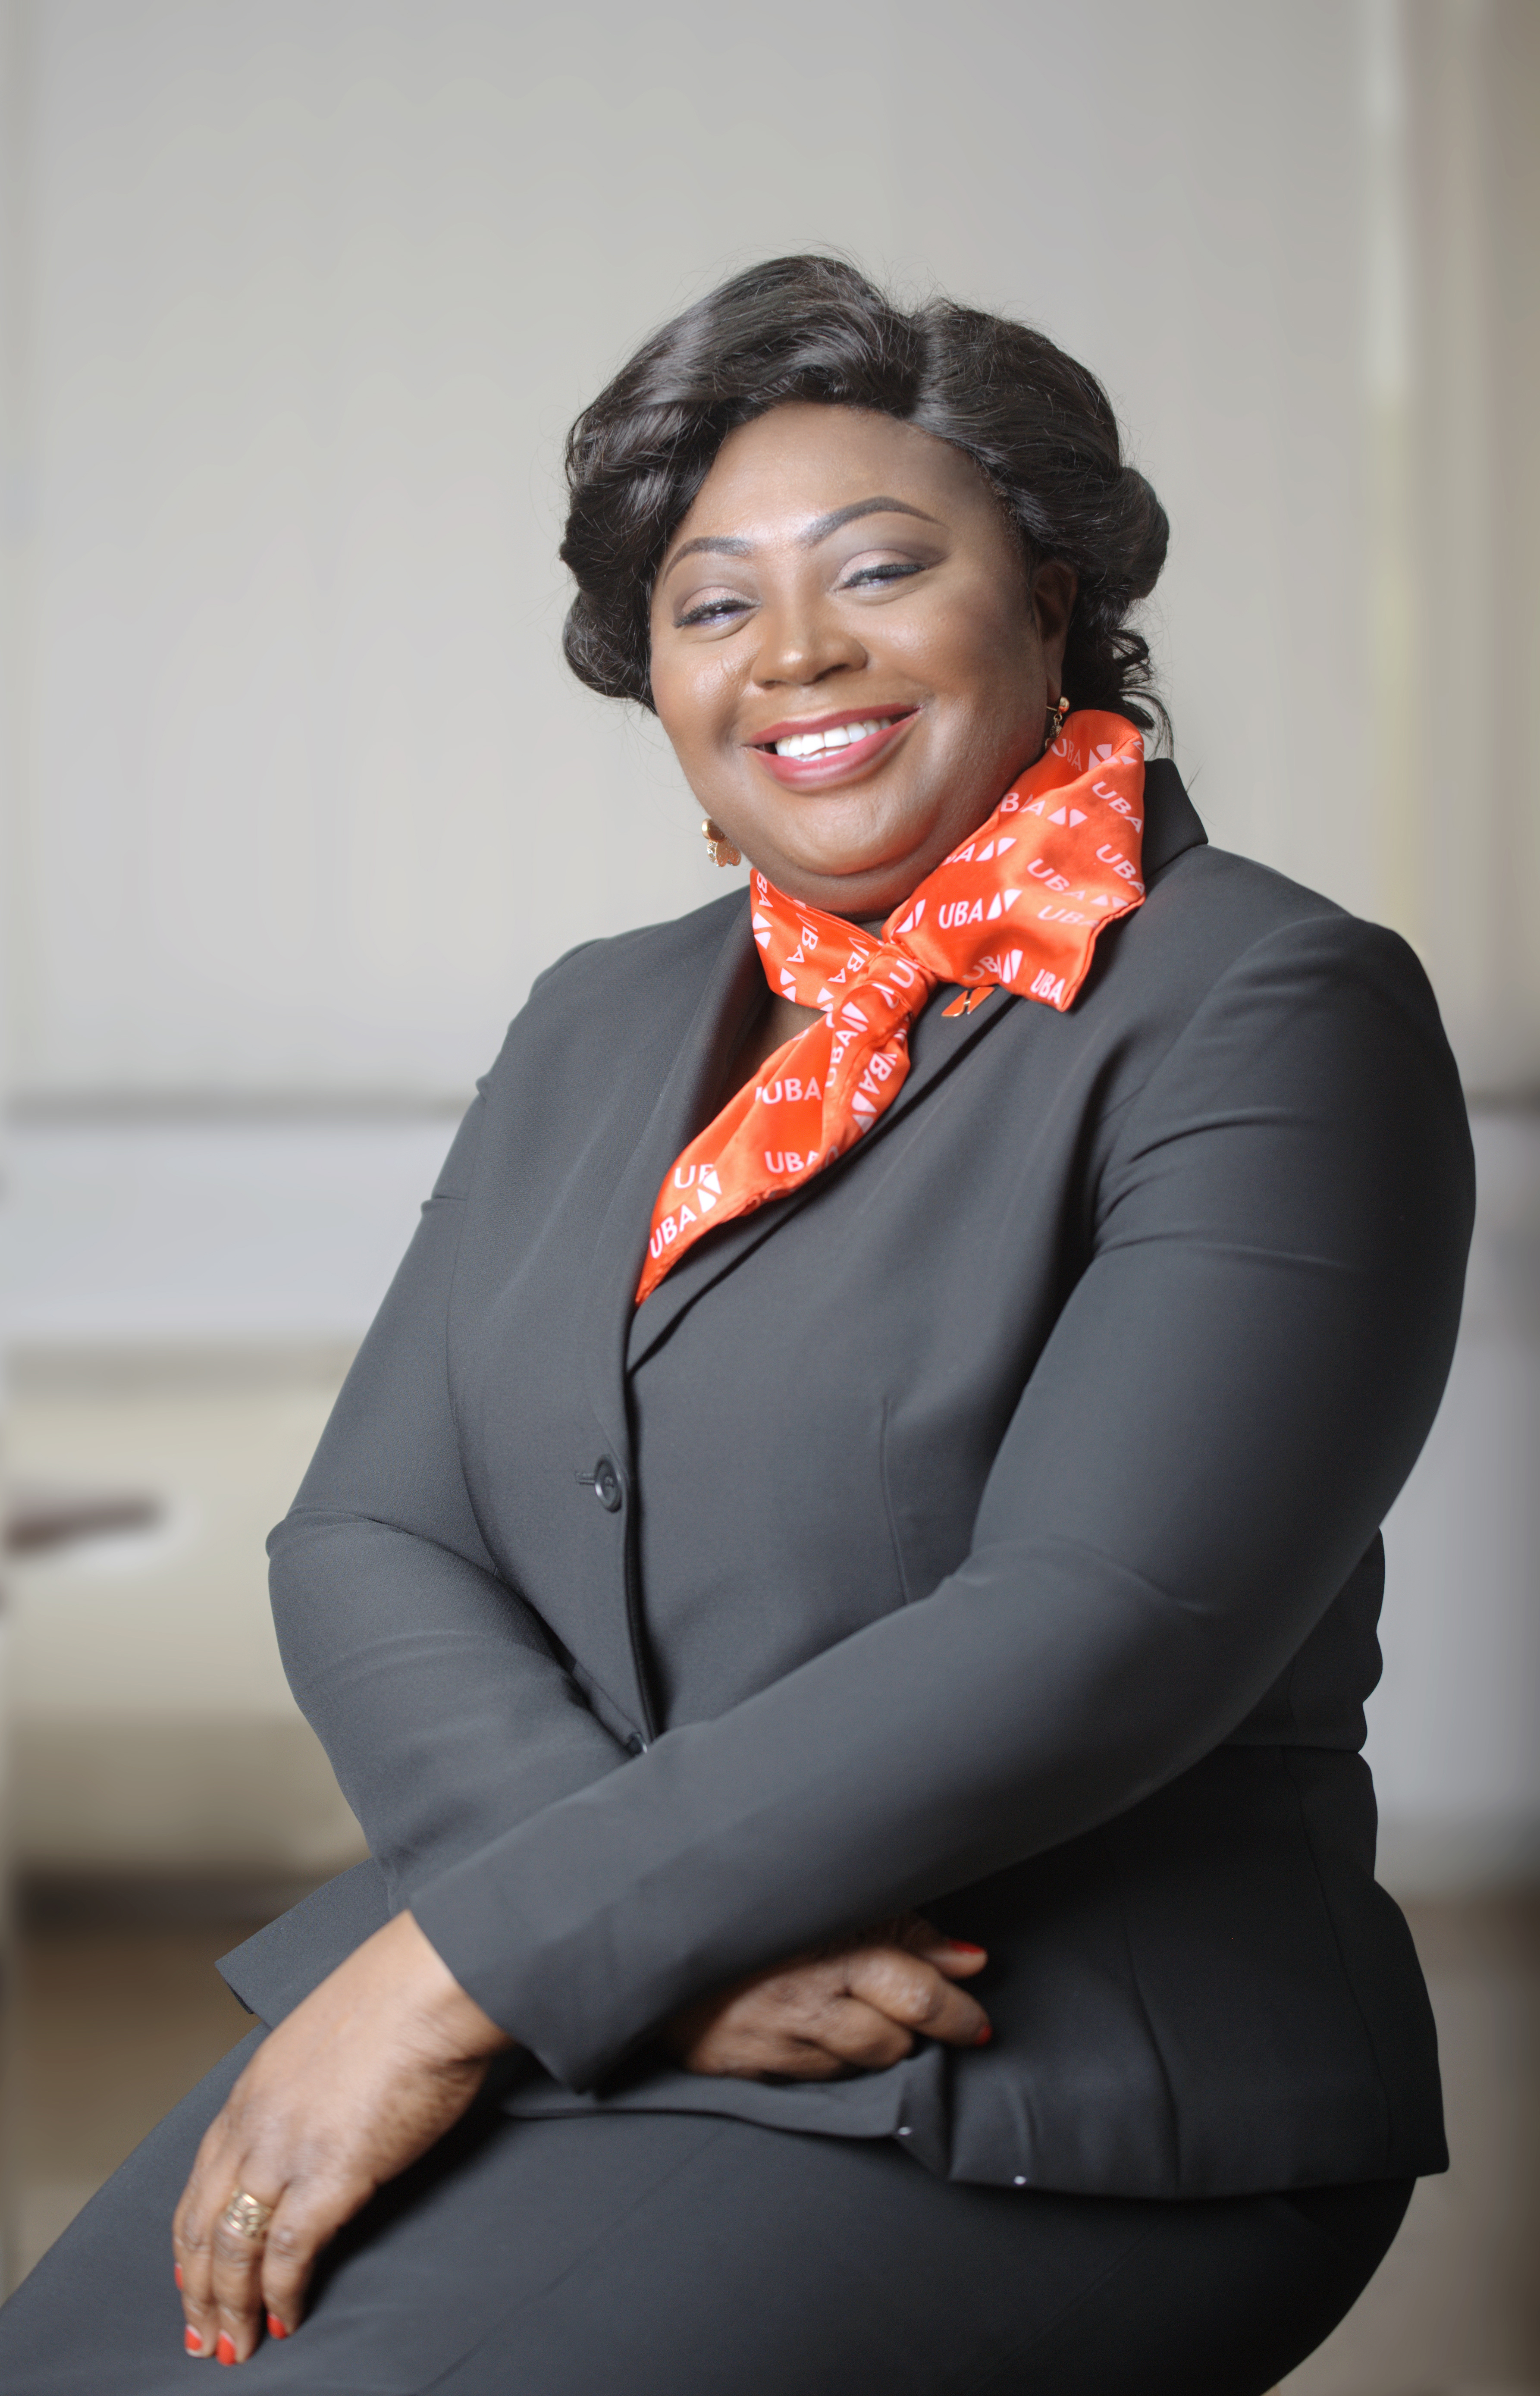 Abiola Bawuah has been appointed as UBA's first female CEO